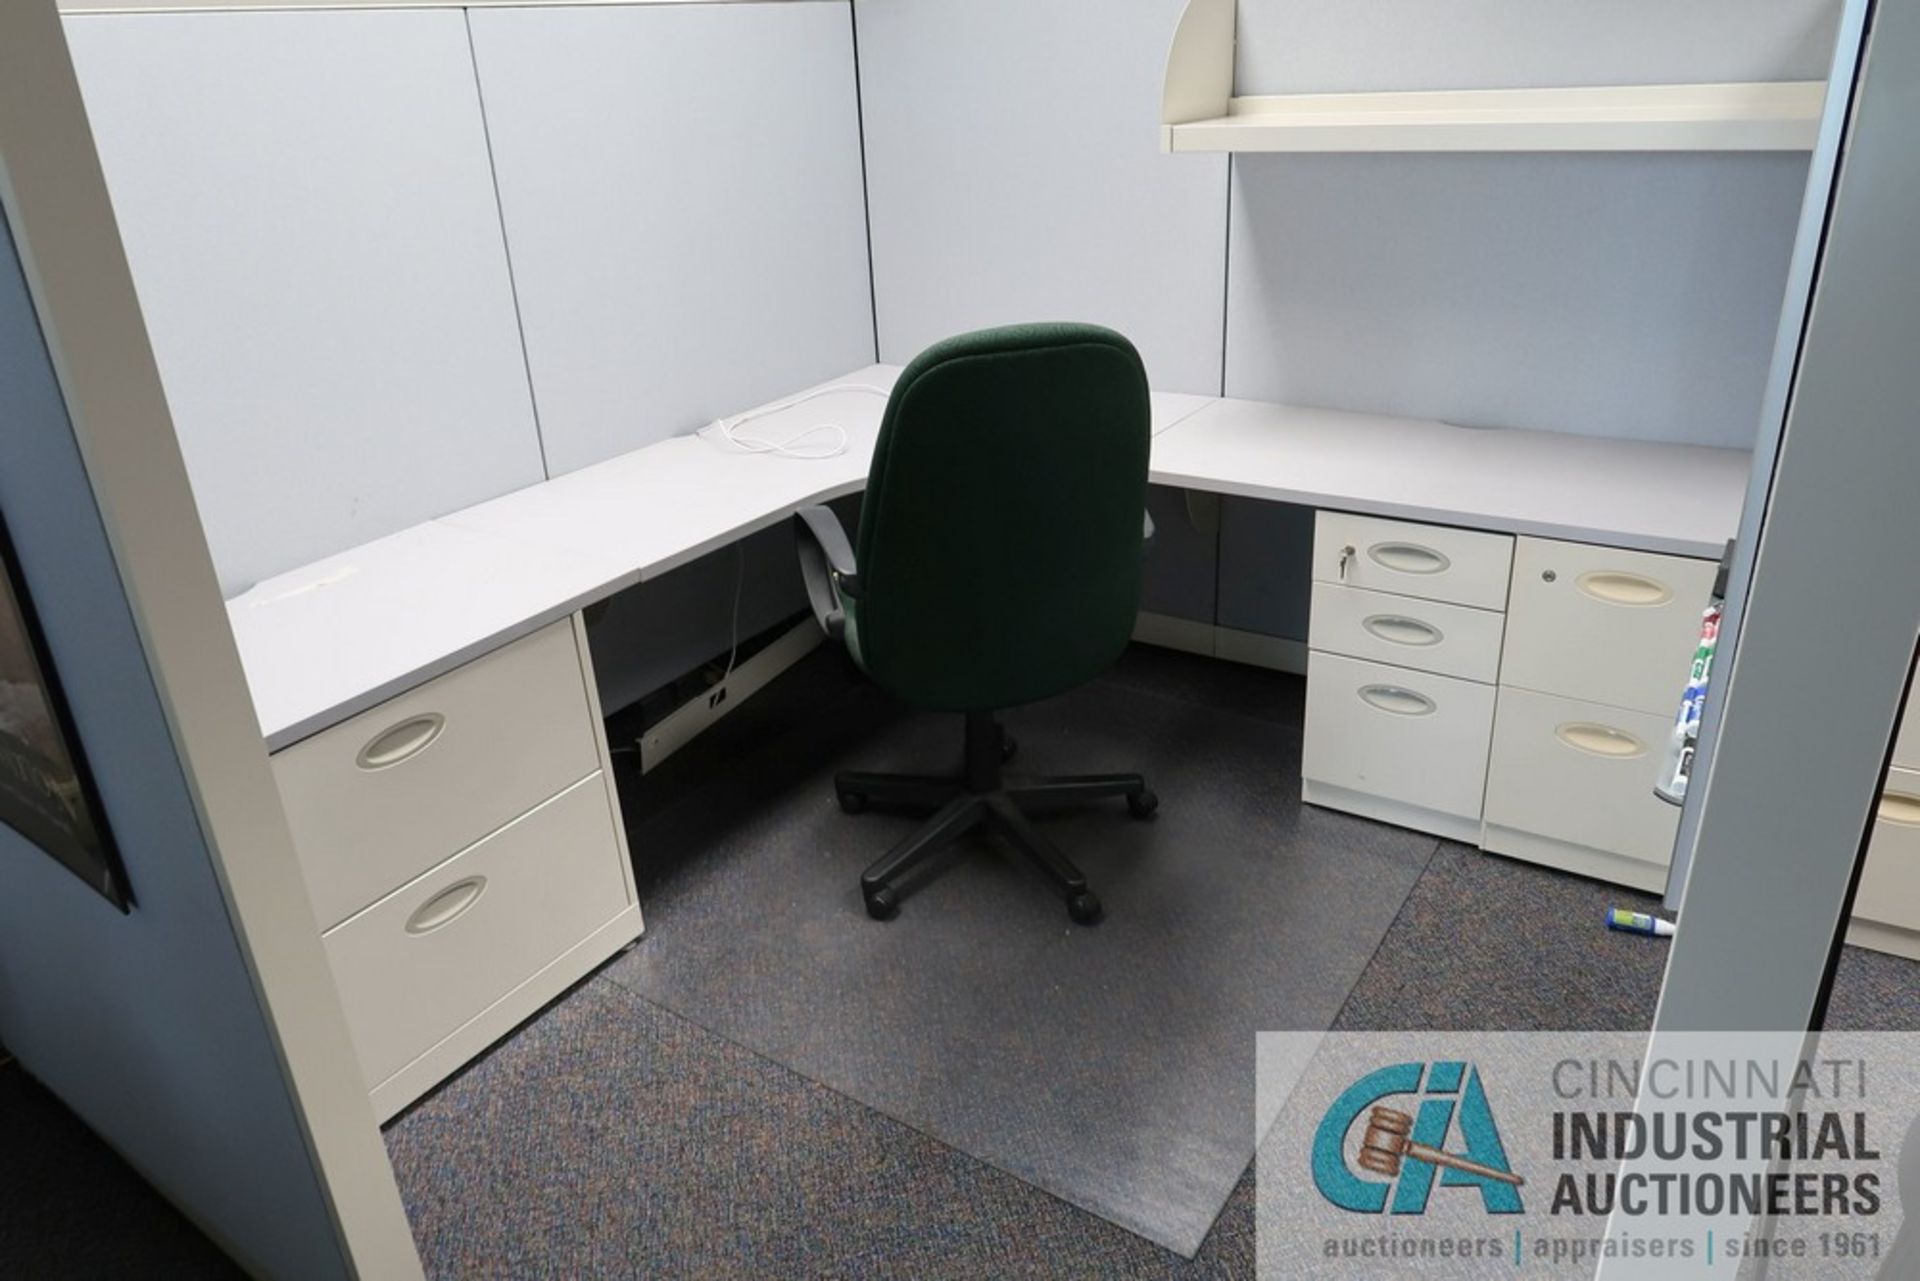 PERSON 96" X 92" MODULAR OFFICE CUBICLES WITH (2) CHAIRS - Image 3 of 3